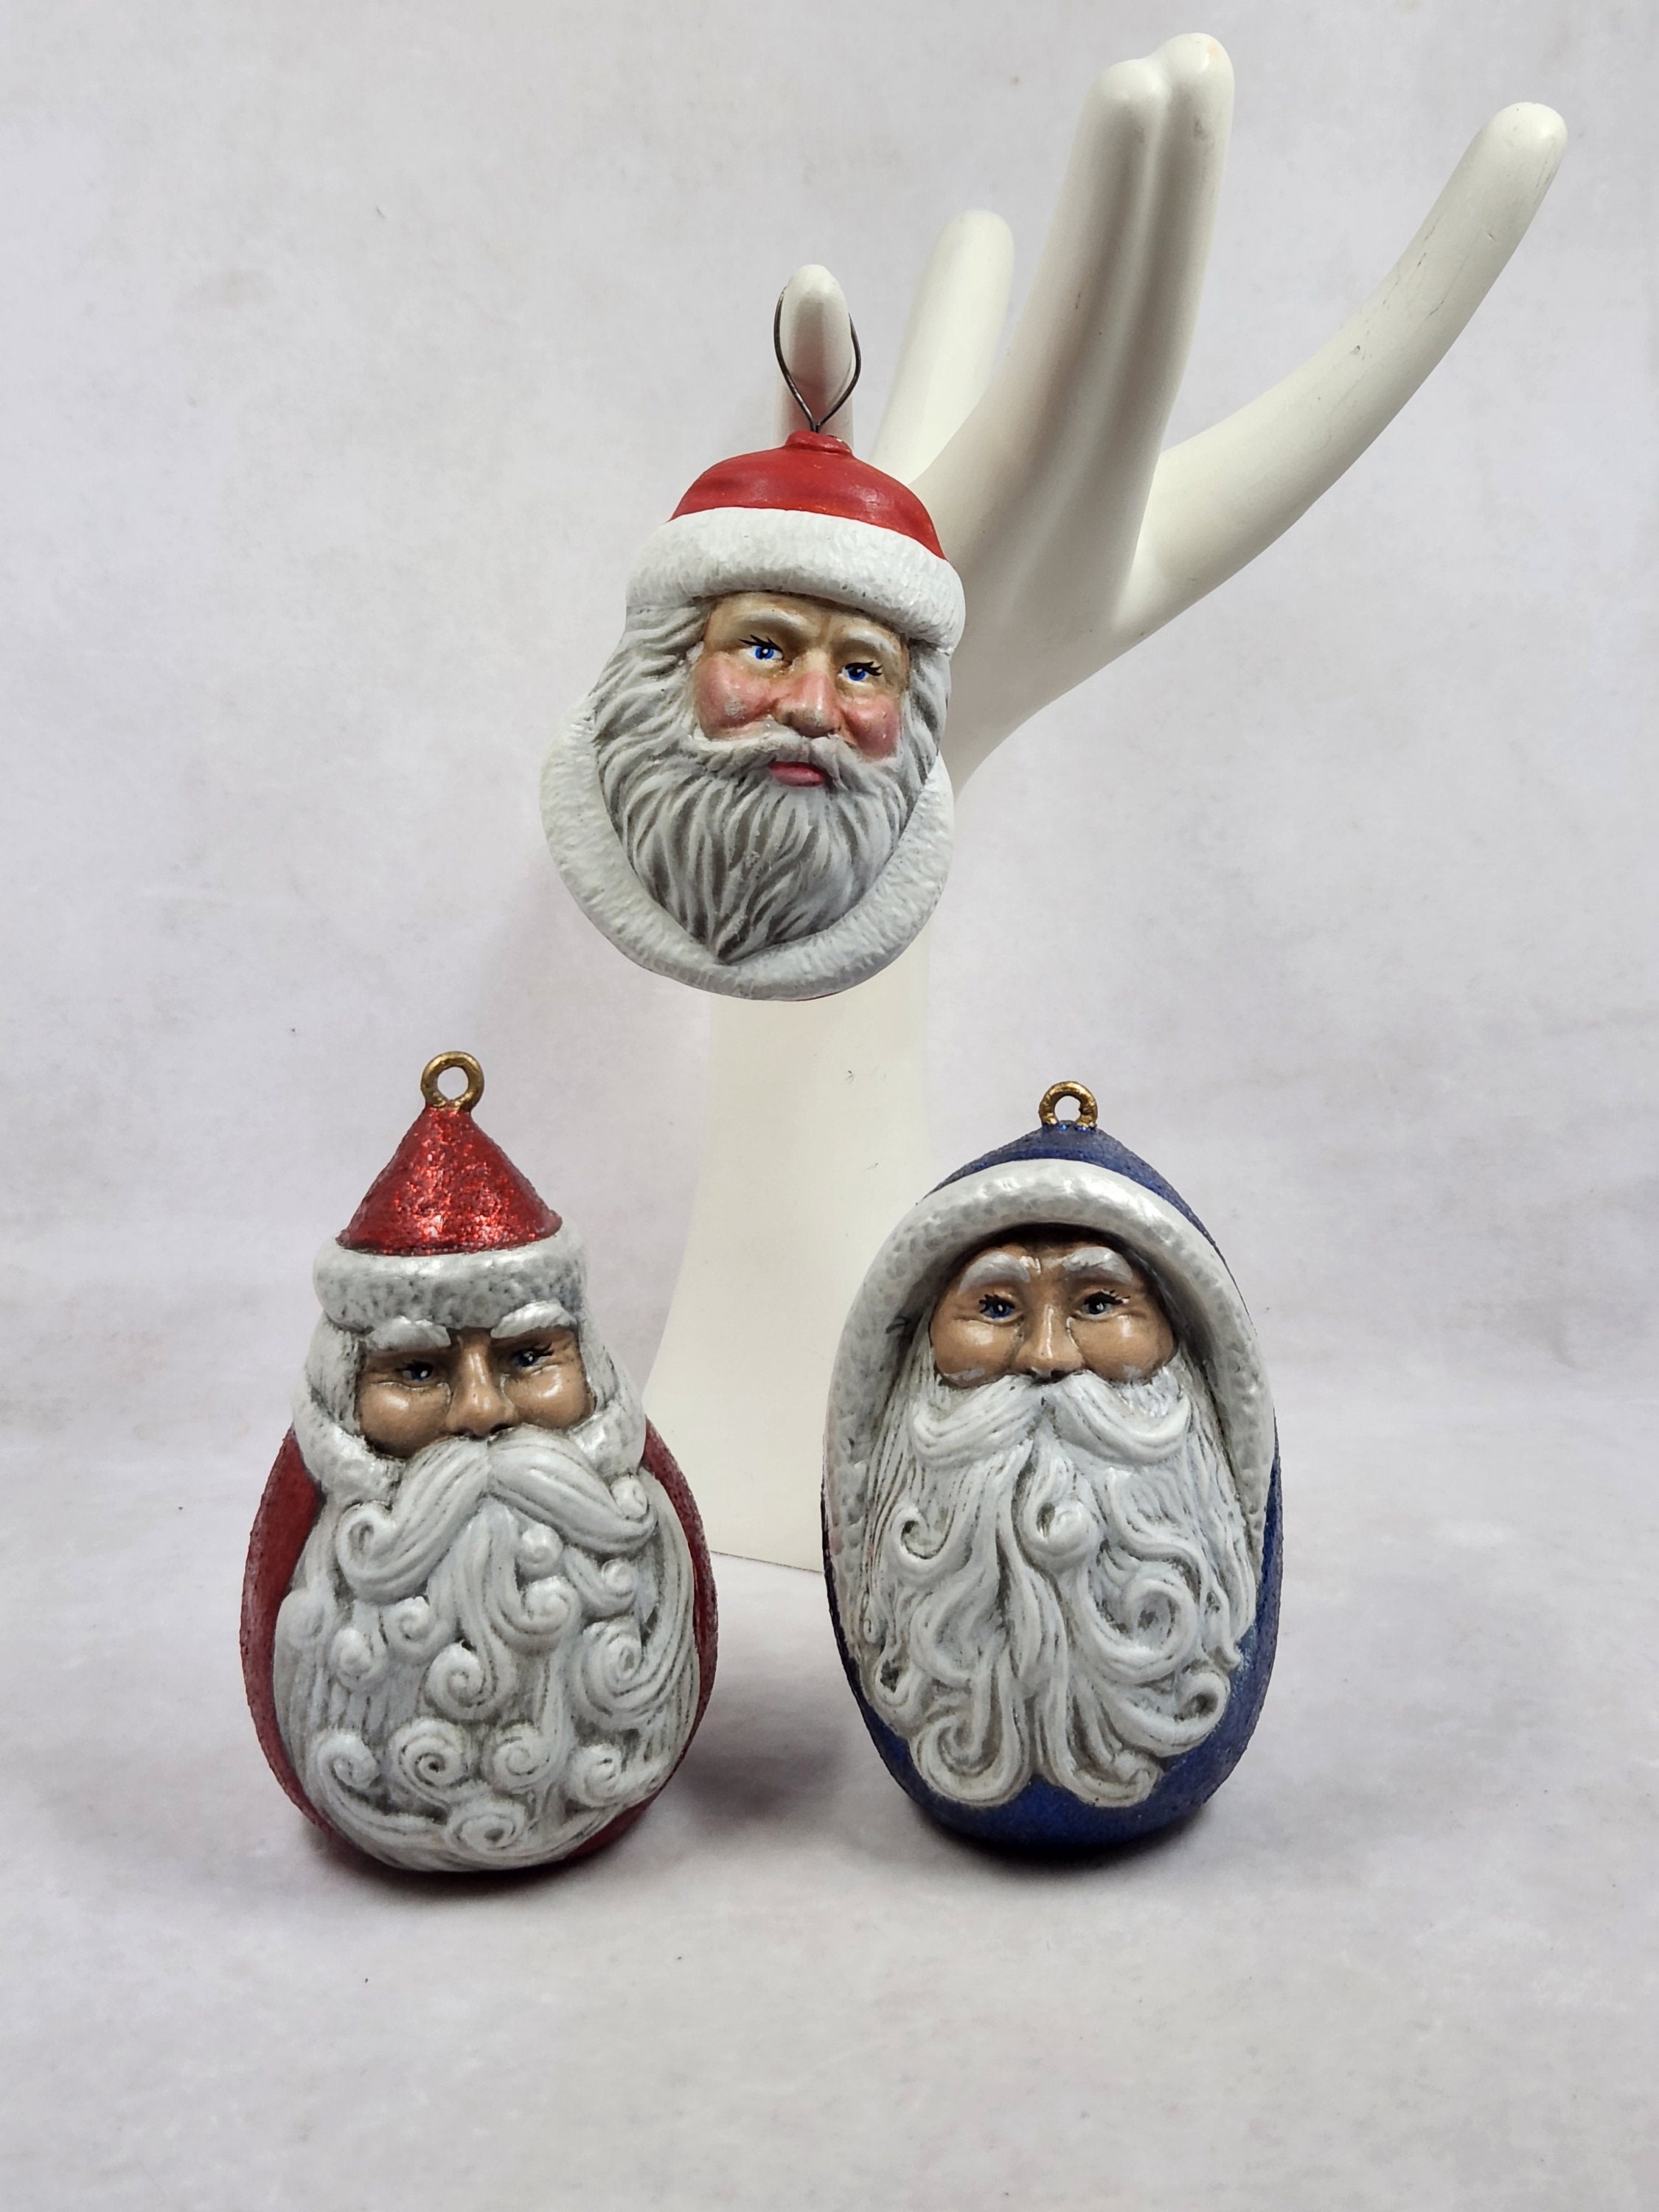 Ceramic Santa Claus, Ready To Paint, Ornament, Figurine, Christmas Decor,  Vintage Style, Gift Idea, Old World Santa, Bisque, Collectable